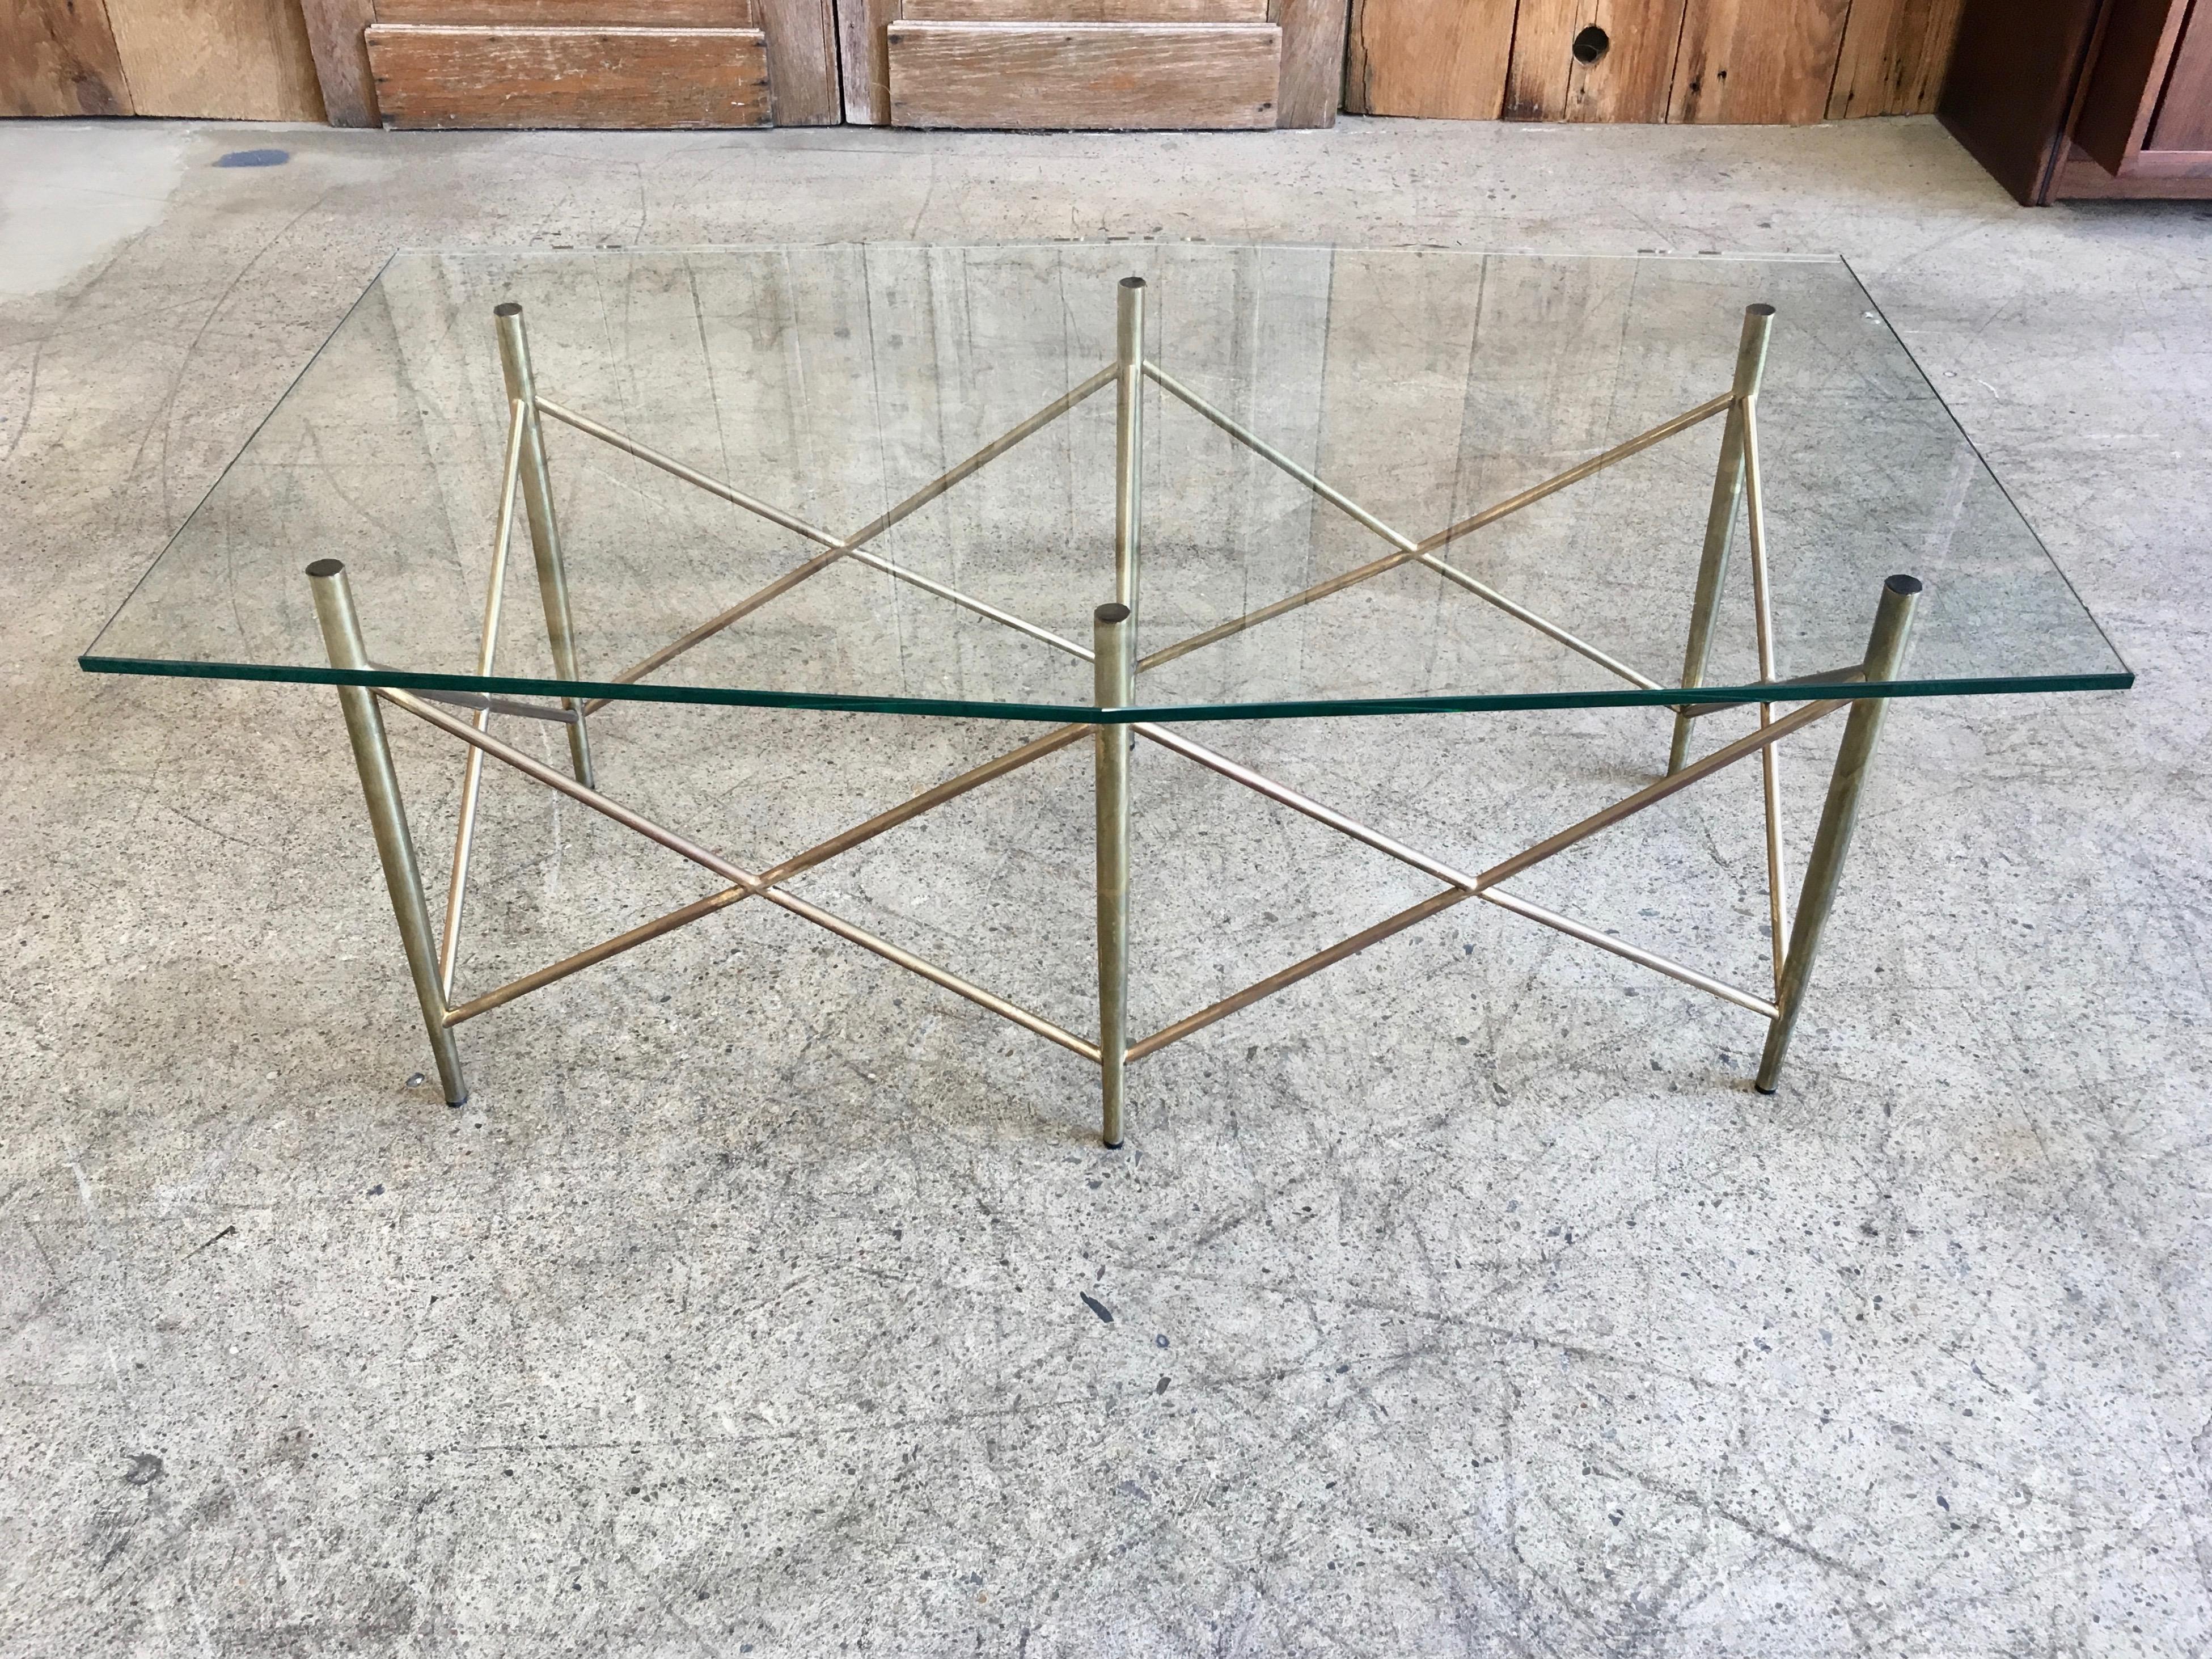 Intersecting brass tubes form a beautiful base for this custom hexagonal glass